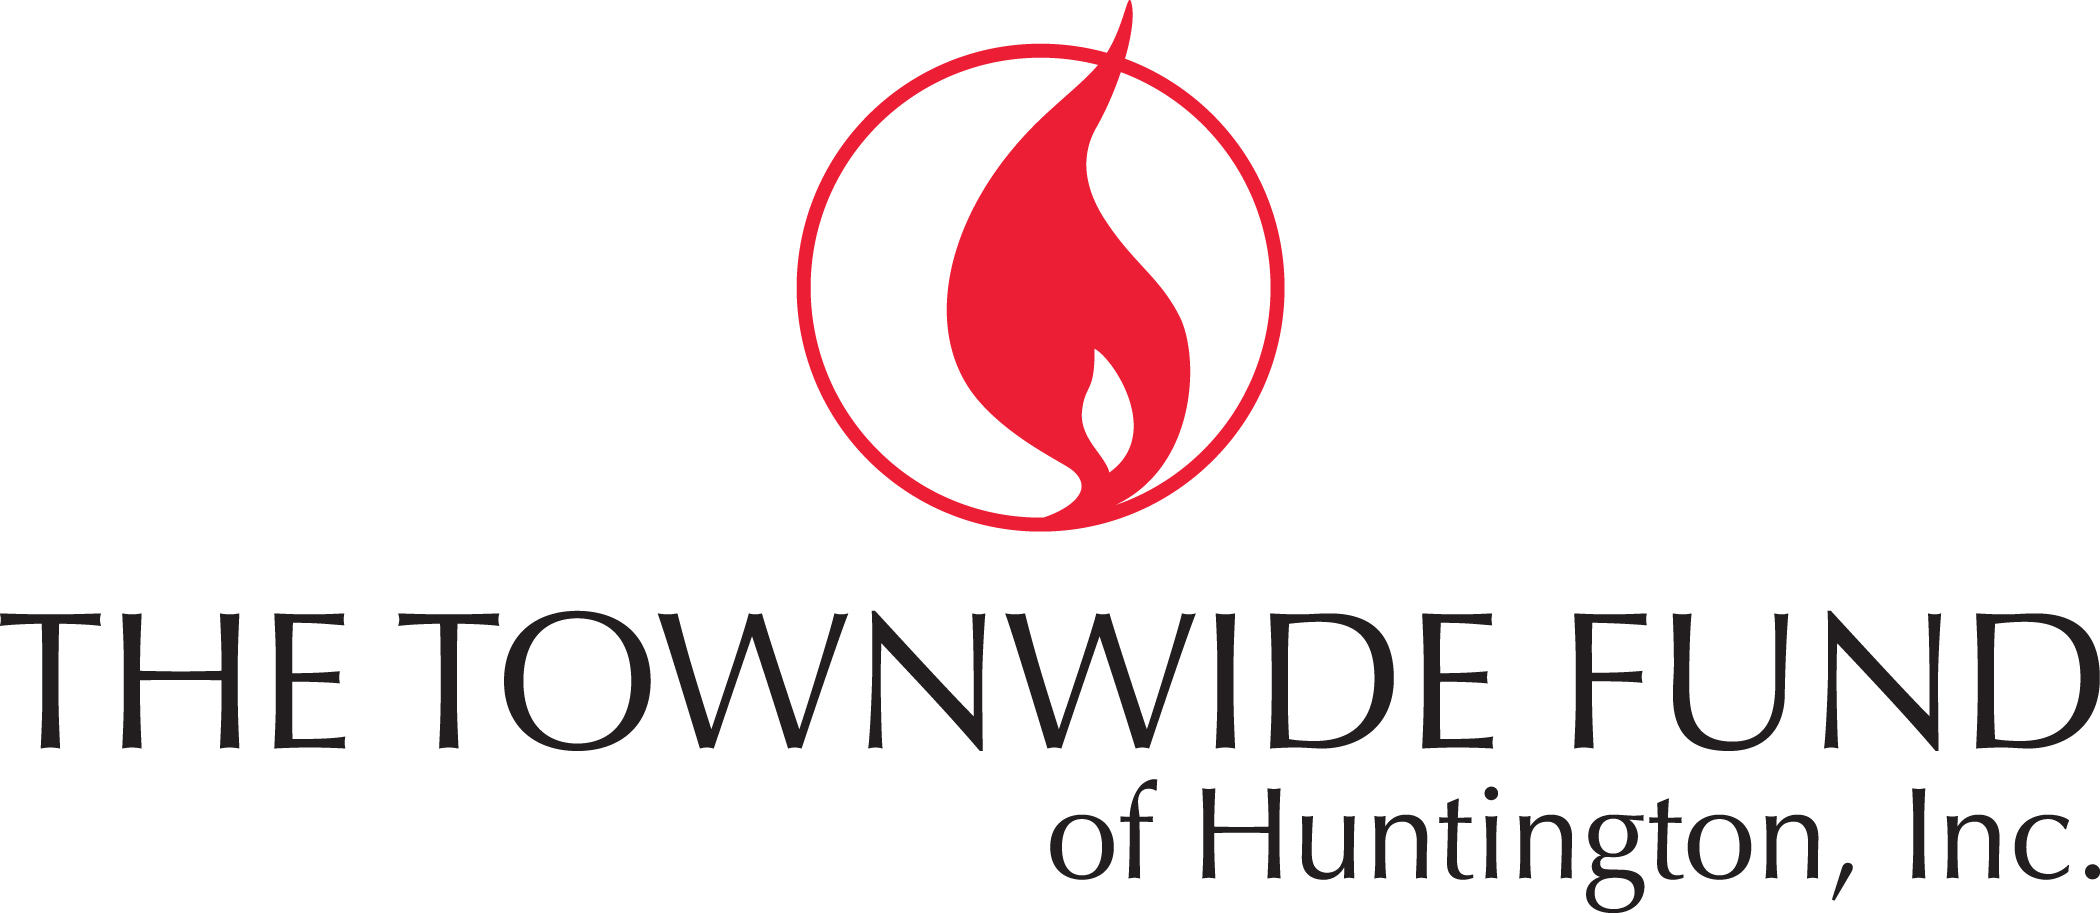 The Townwide Fund of Huntington, Inc.